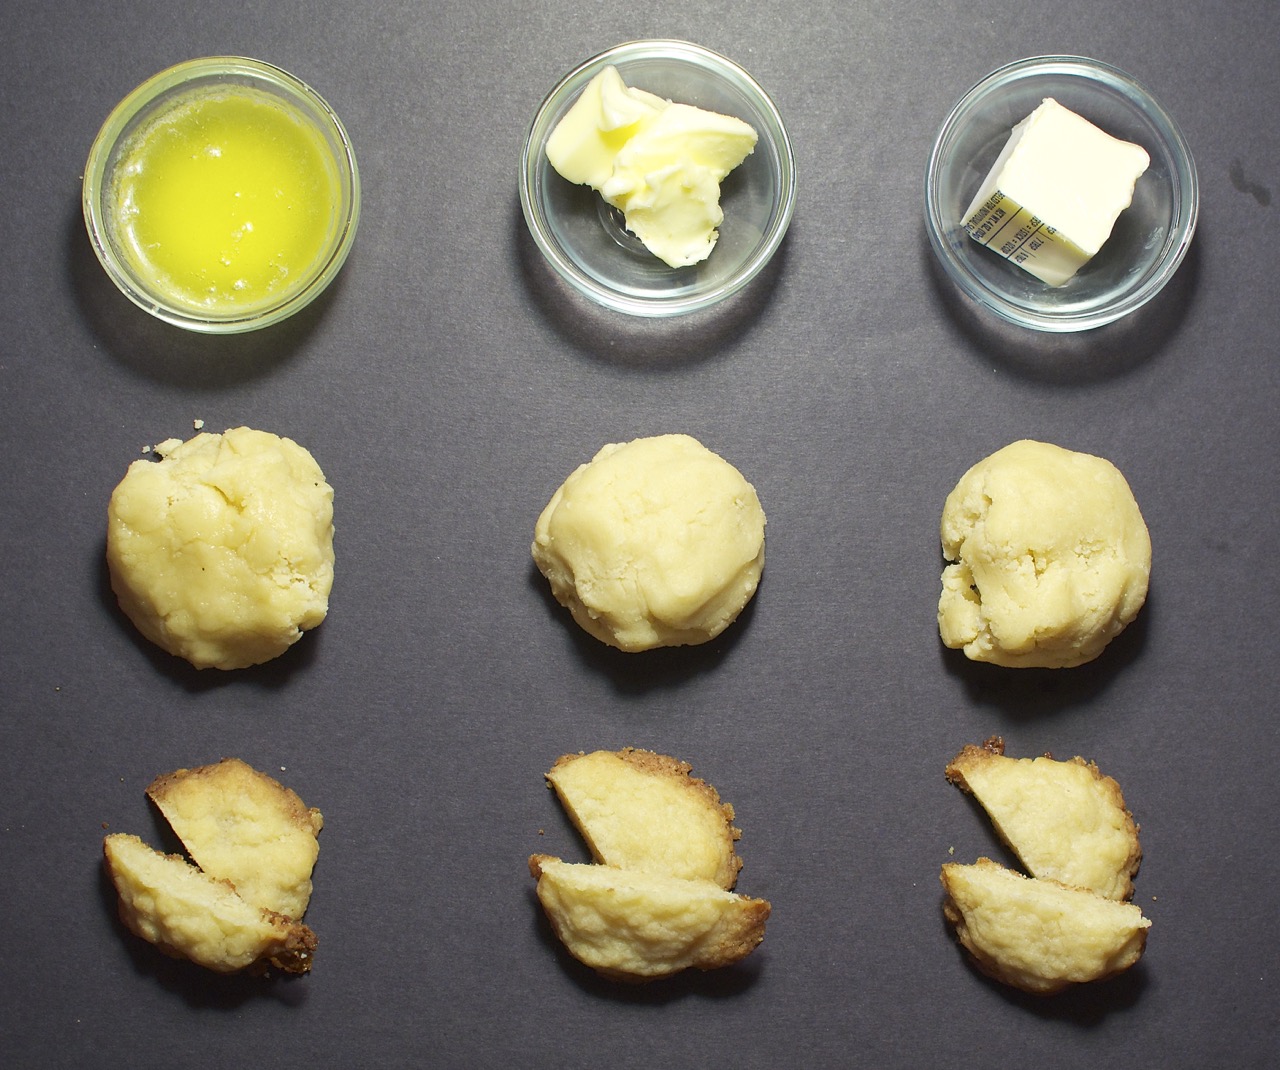 Sugar cookies made with different butter temperatures. Photo by Jeff Potter